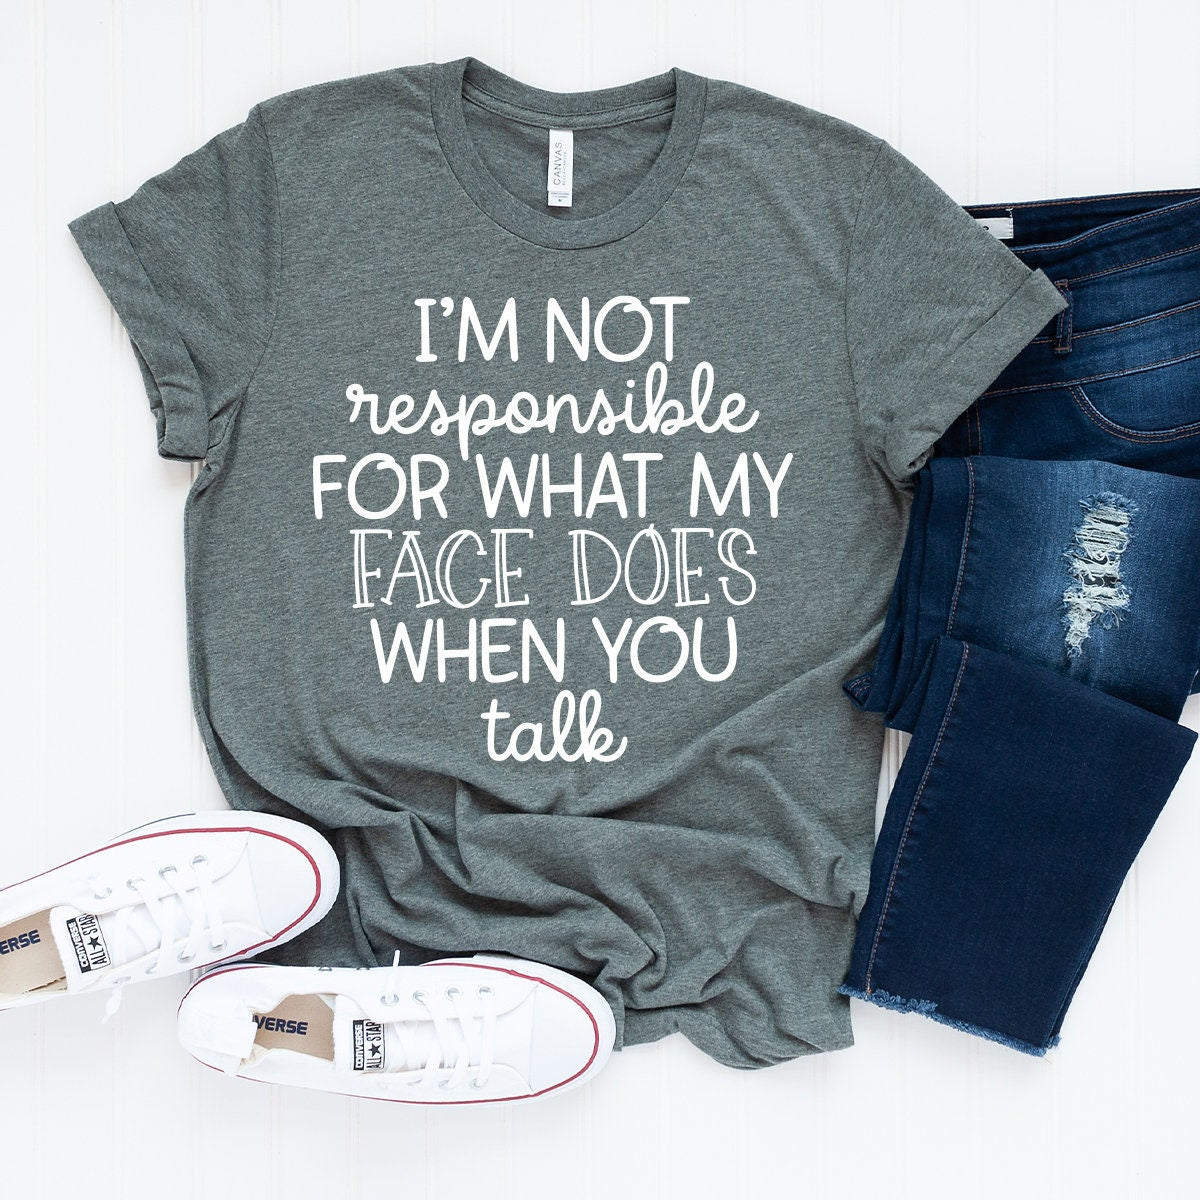 I'm Not Responsible For What My Face Does When You Talk shirt, Funny Sarcasm Shirt, Attitude Shirt, Funny Responsible Tee, Sarcastic Shirt - Fastdeliverytees.com